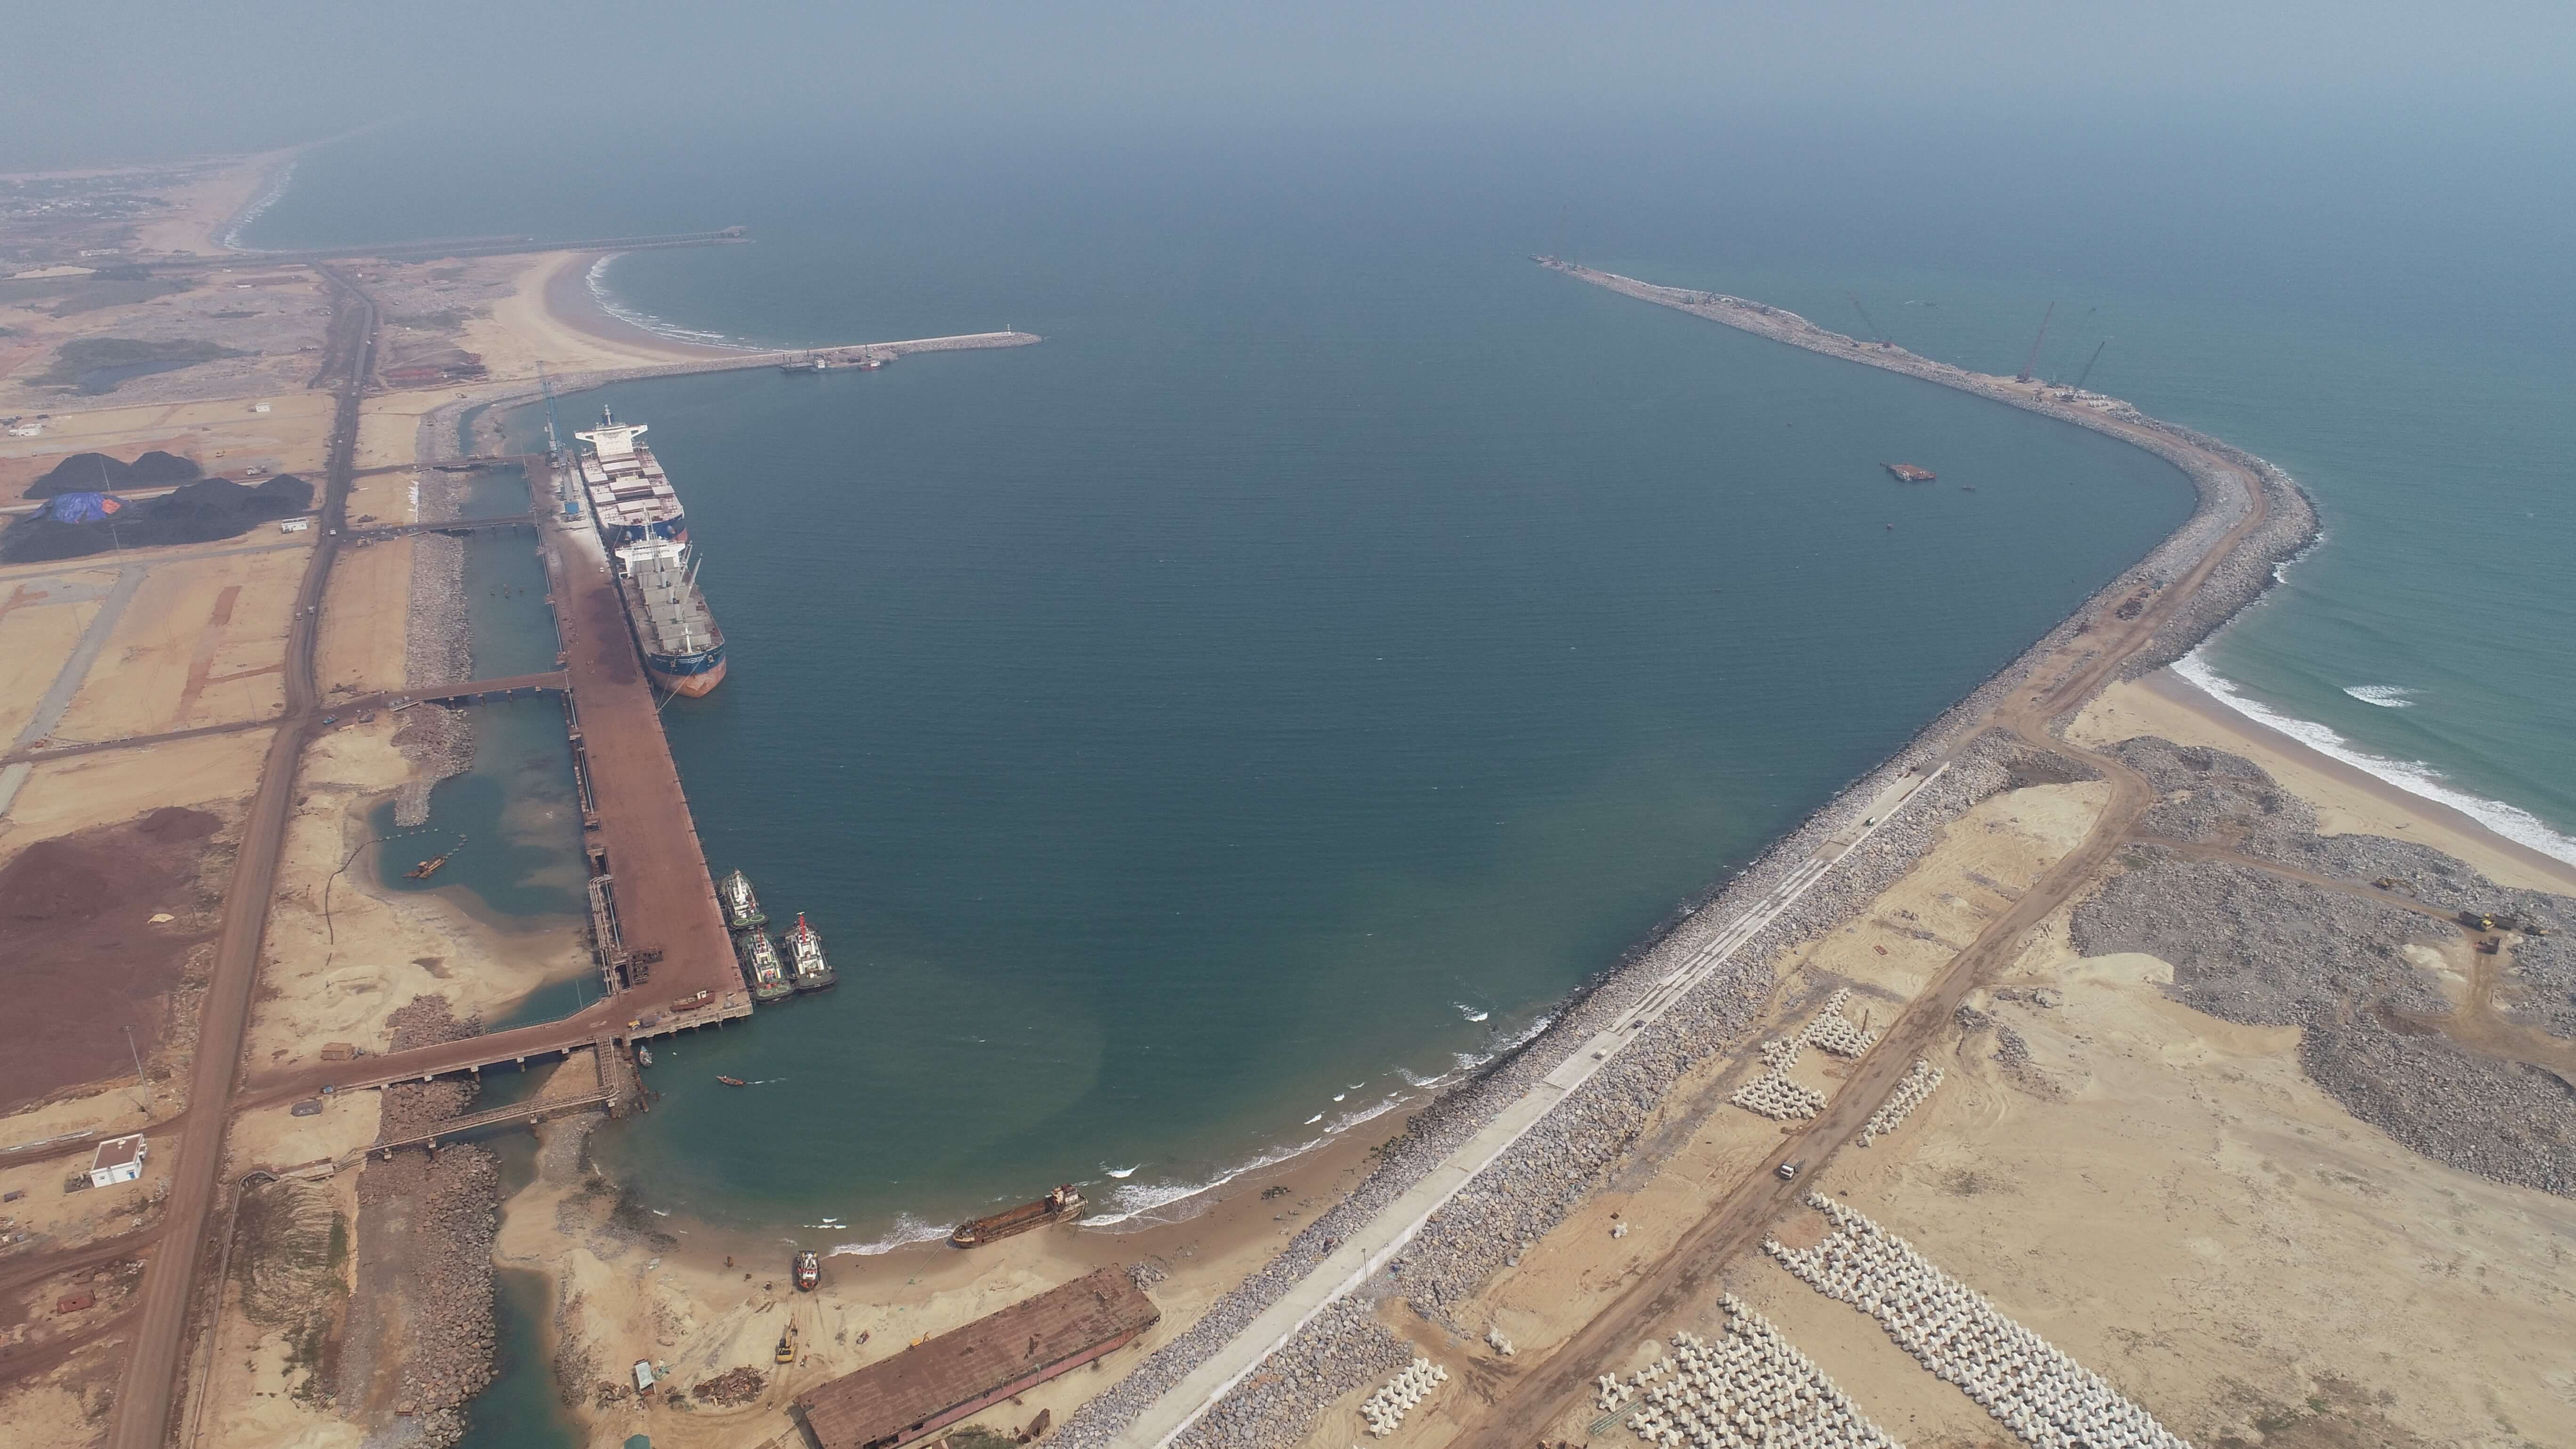 The Gopalpur Port now operates out of three berths, making it capable of handling up to 20 million tonnes per annum